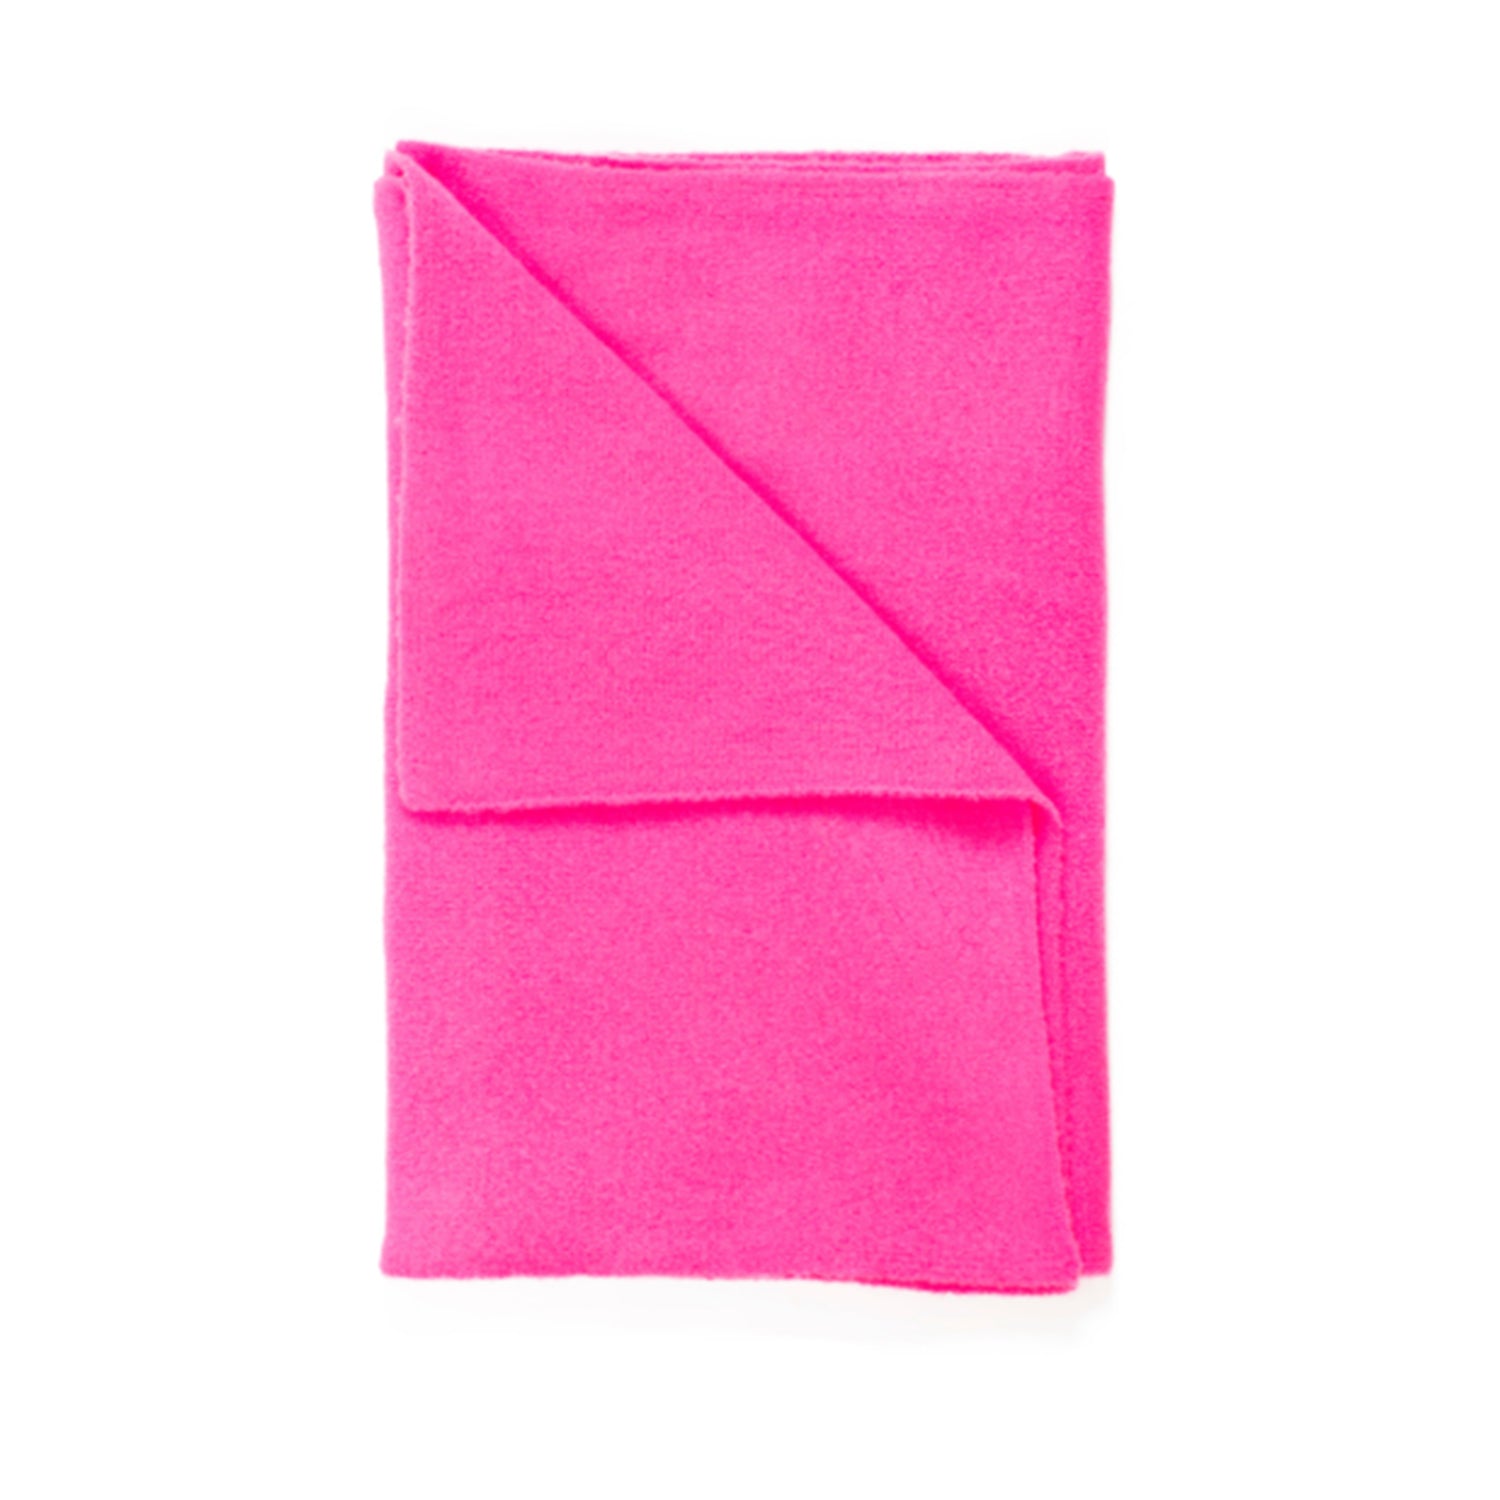 Lyla & Luxe Marl Scarf in Hot Pink, O/S